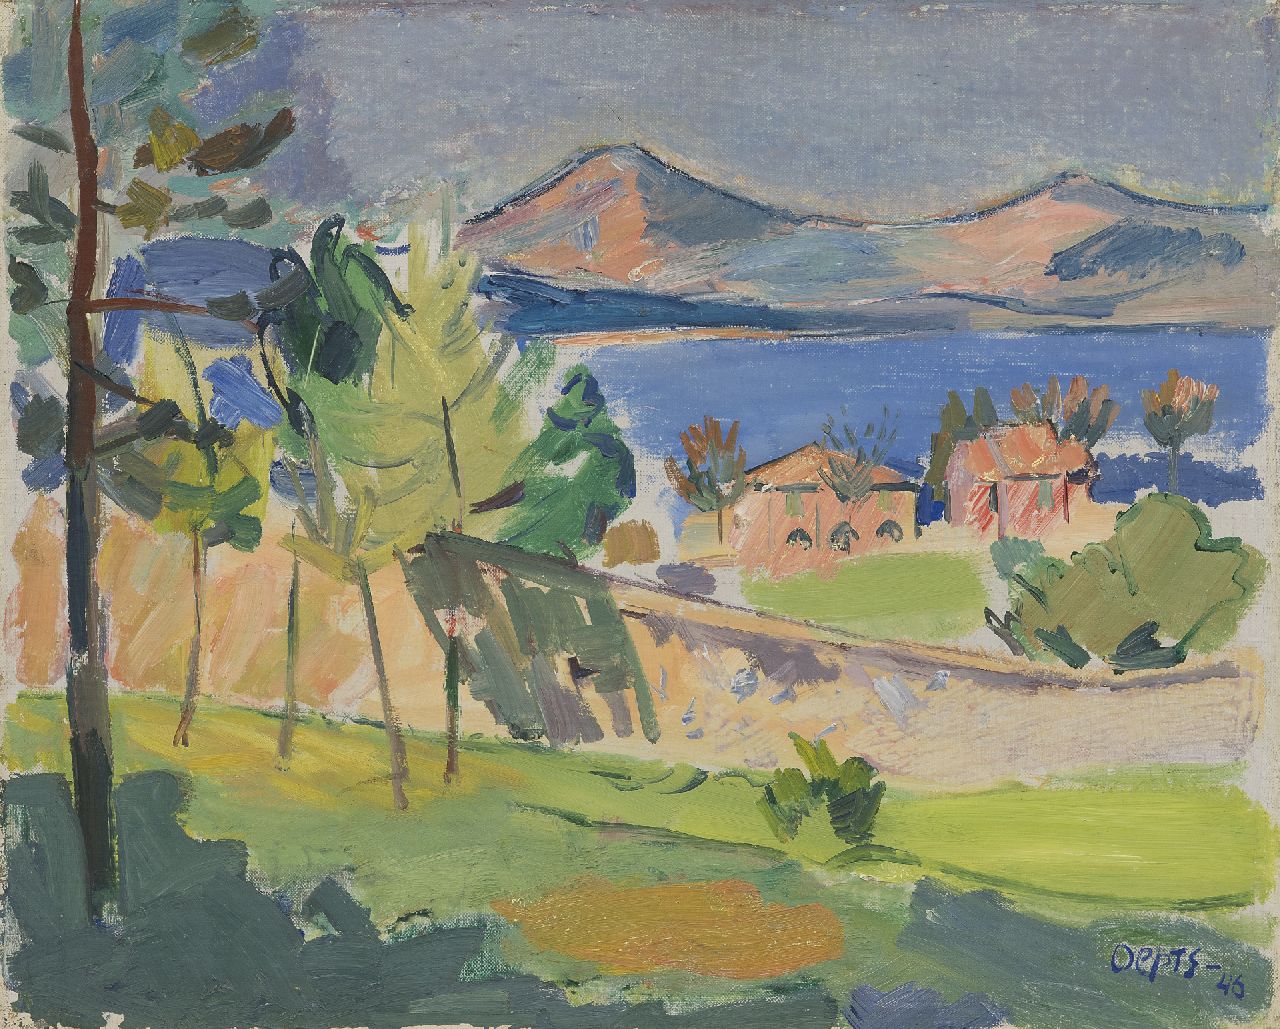 Oepts W.A.  | Willem Anthonie 'Wim' Oepts, Les Mûriers, Saint Tropez, oil on board 34.6 x 42.5 cm, signed l.r. and dated '46